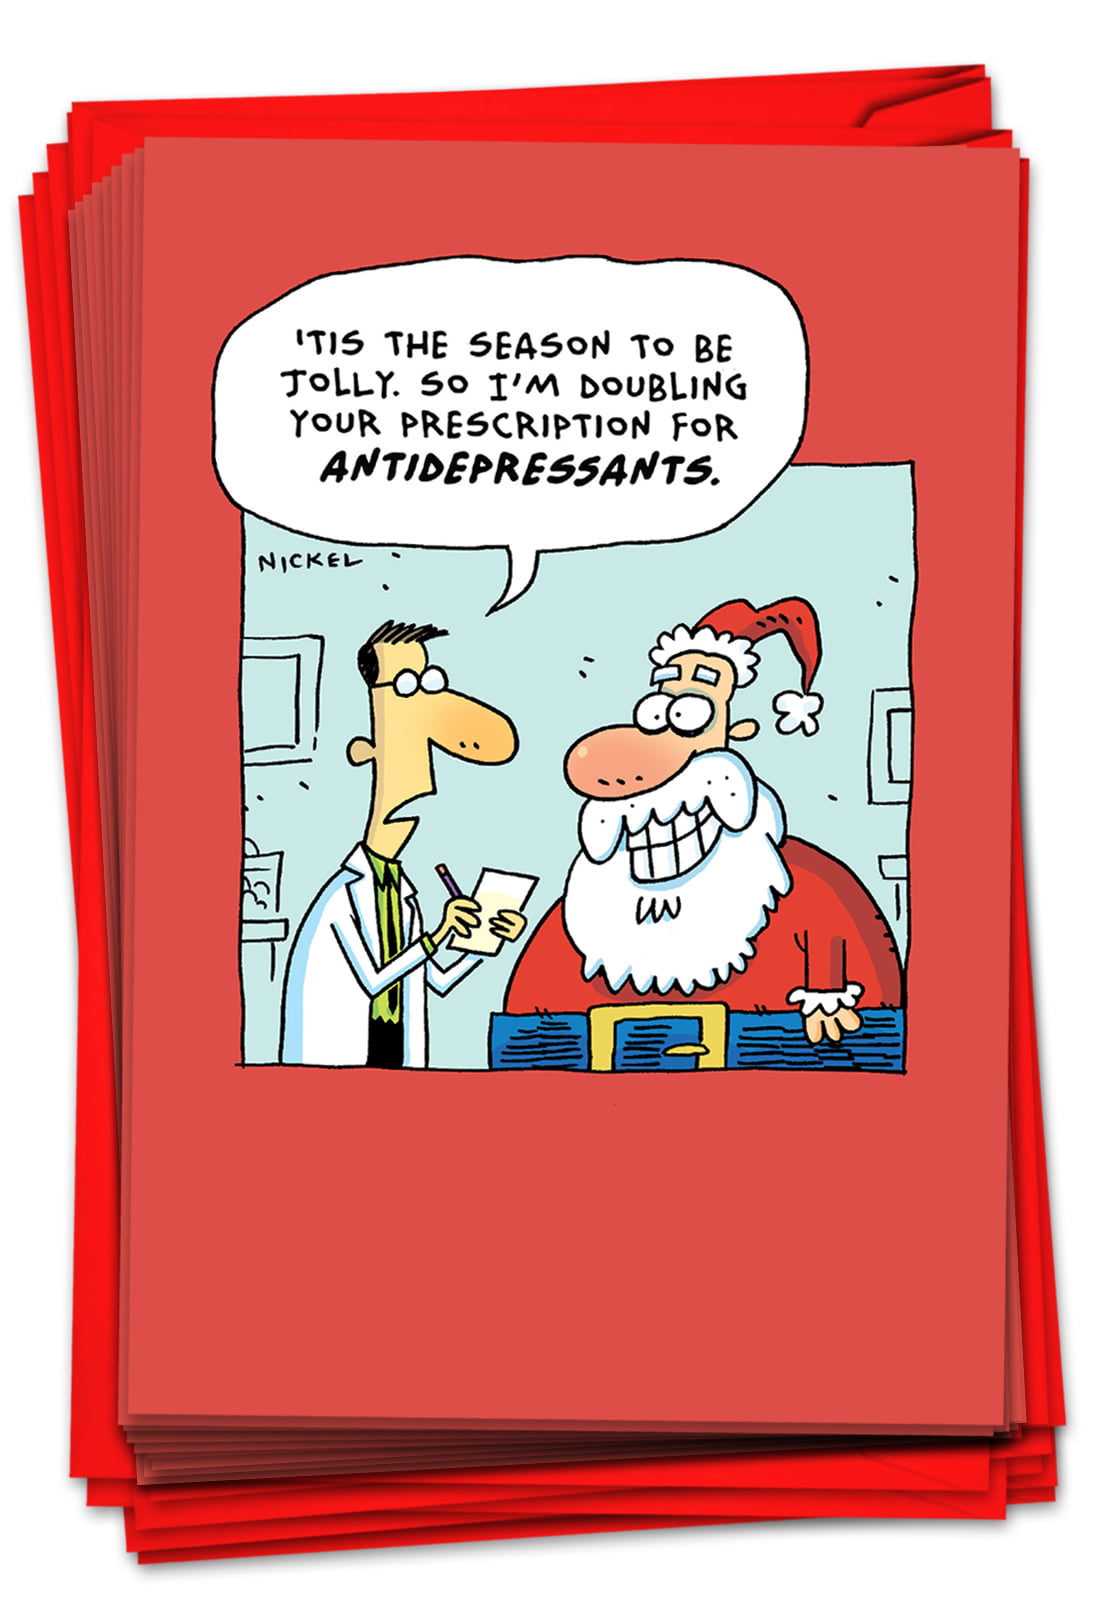 12 Cartoon Christmas Cards for Adults - Medicated Santa Claus Humor ...